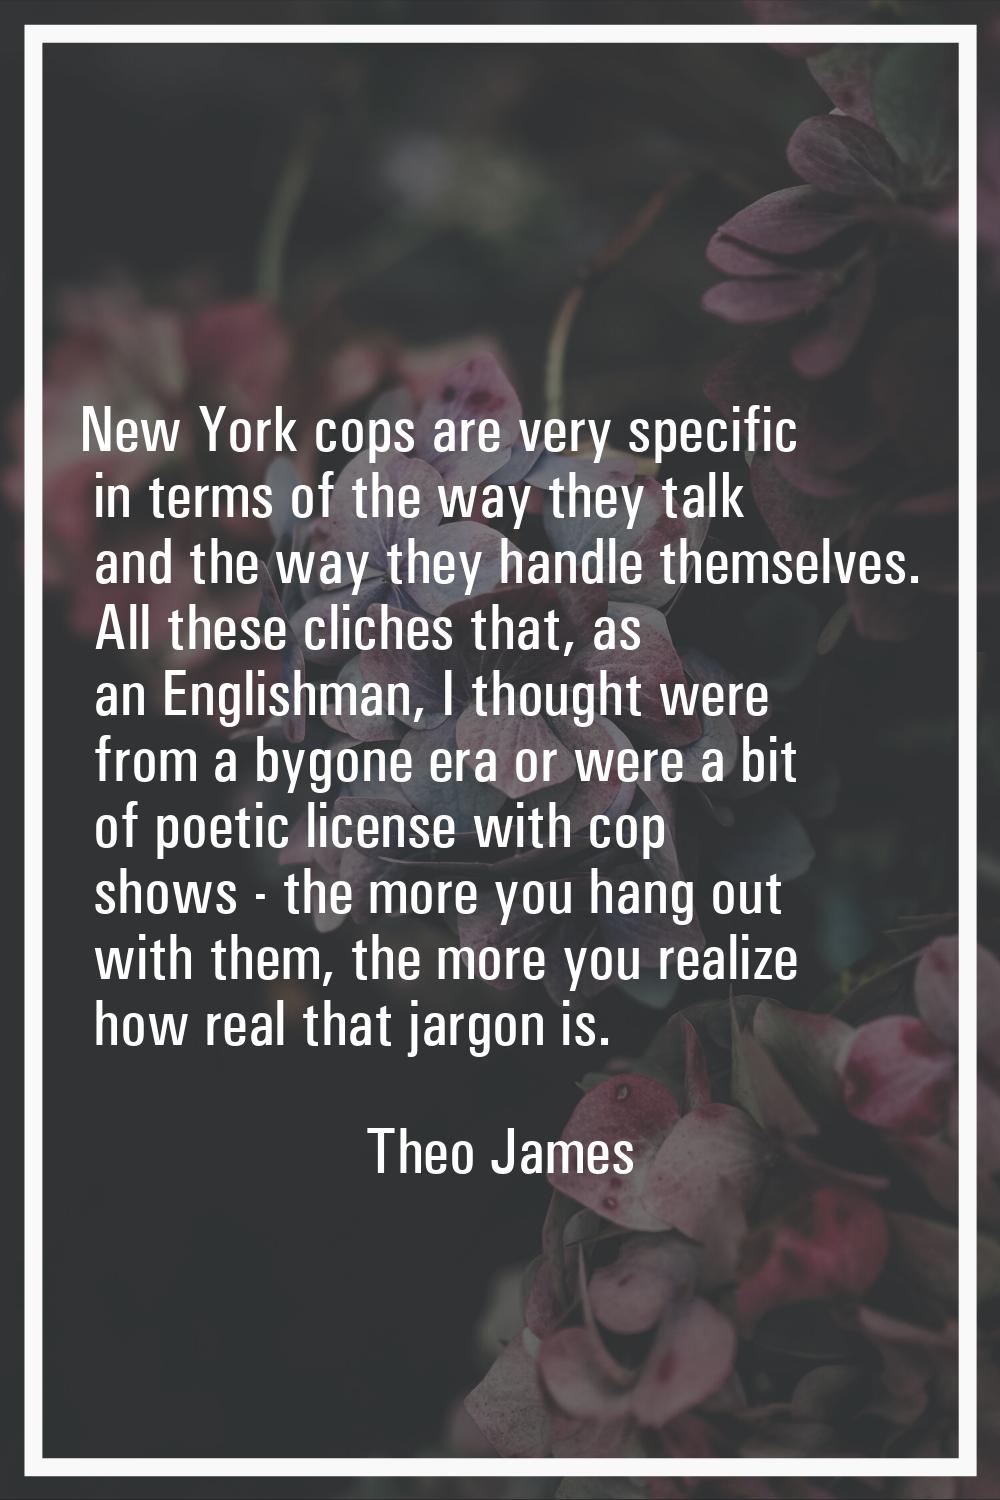 New York cops are very specific in terms of the way they talk and the way they handle themselves. A